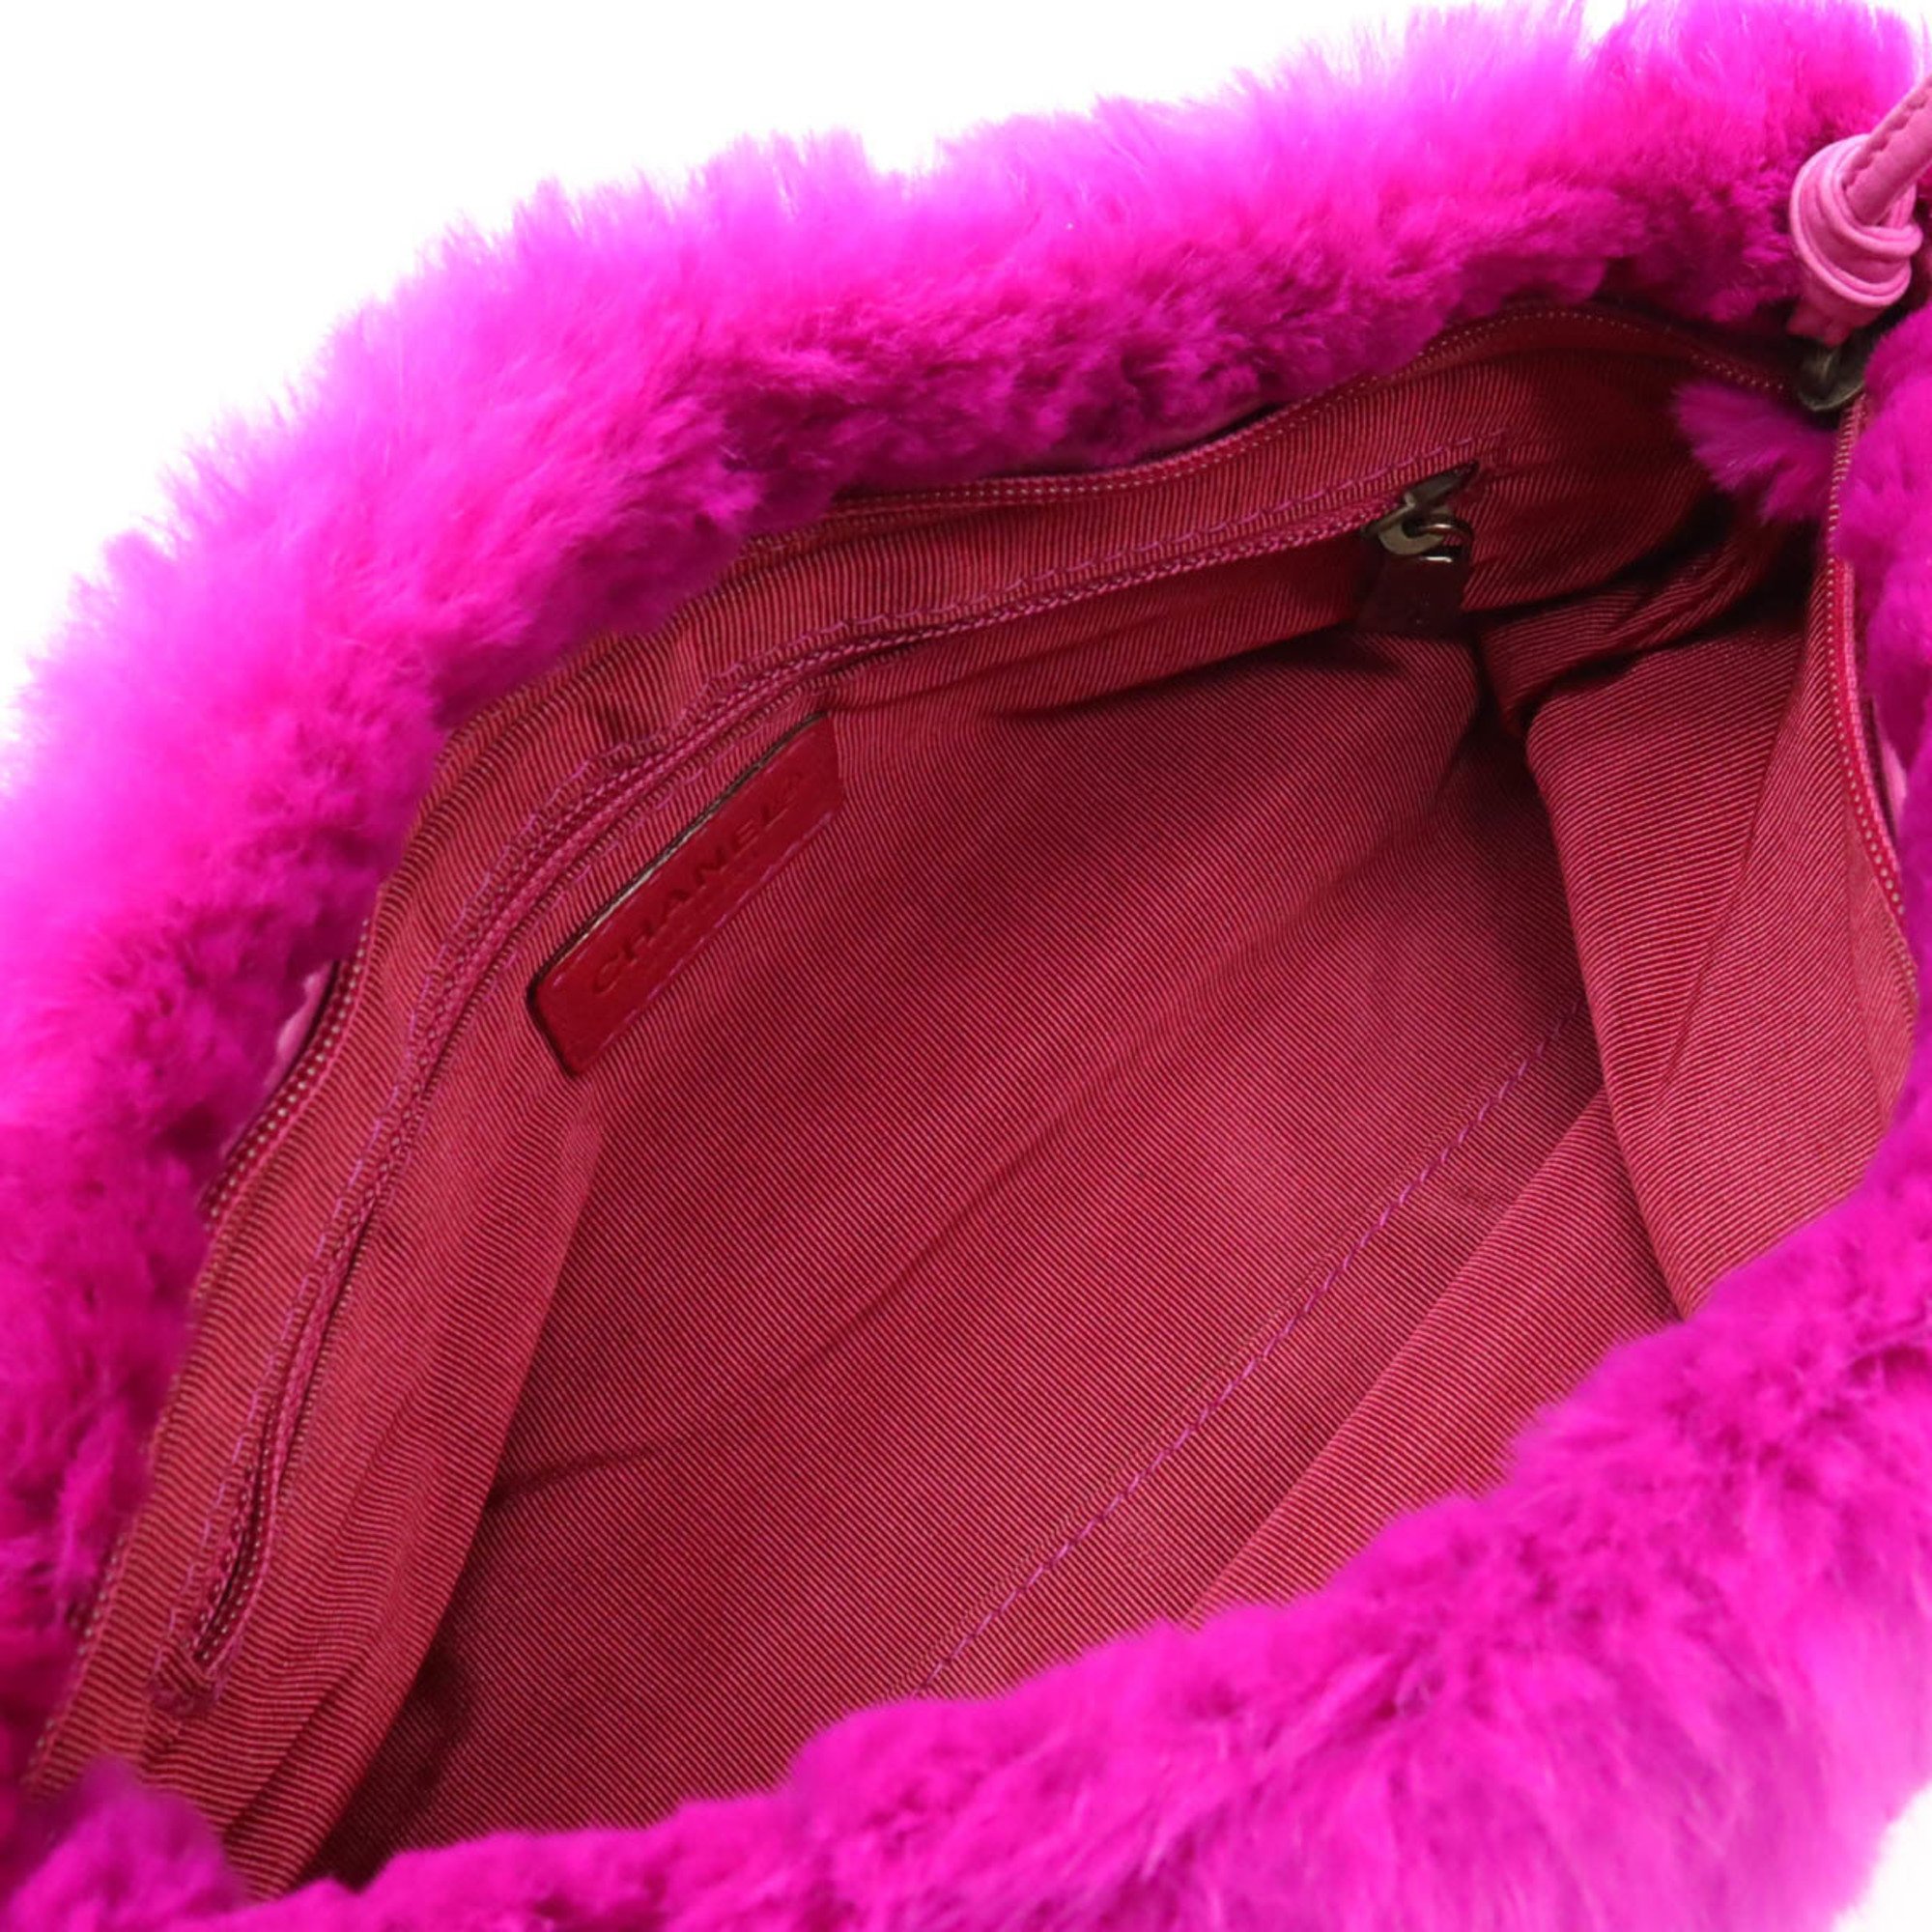 CHANEL Chanel Lapin Rabbit Fur Coco Mark Chain Shoulder Bag Leather Purple Pink